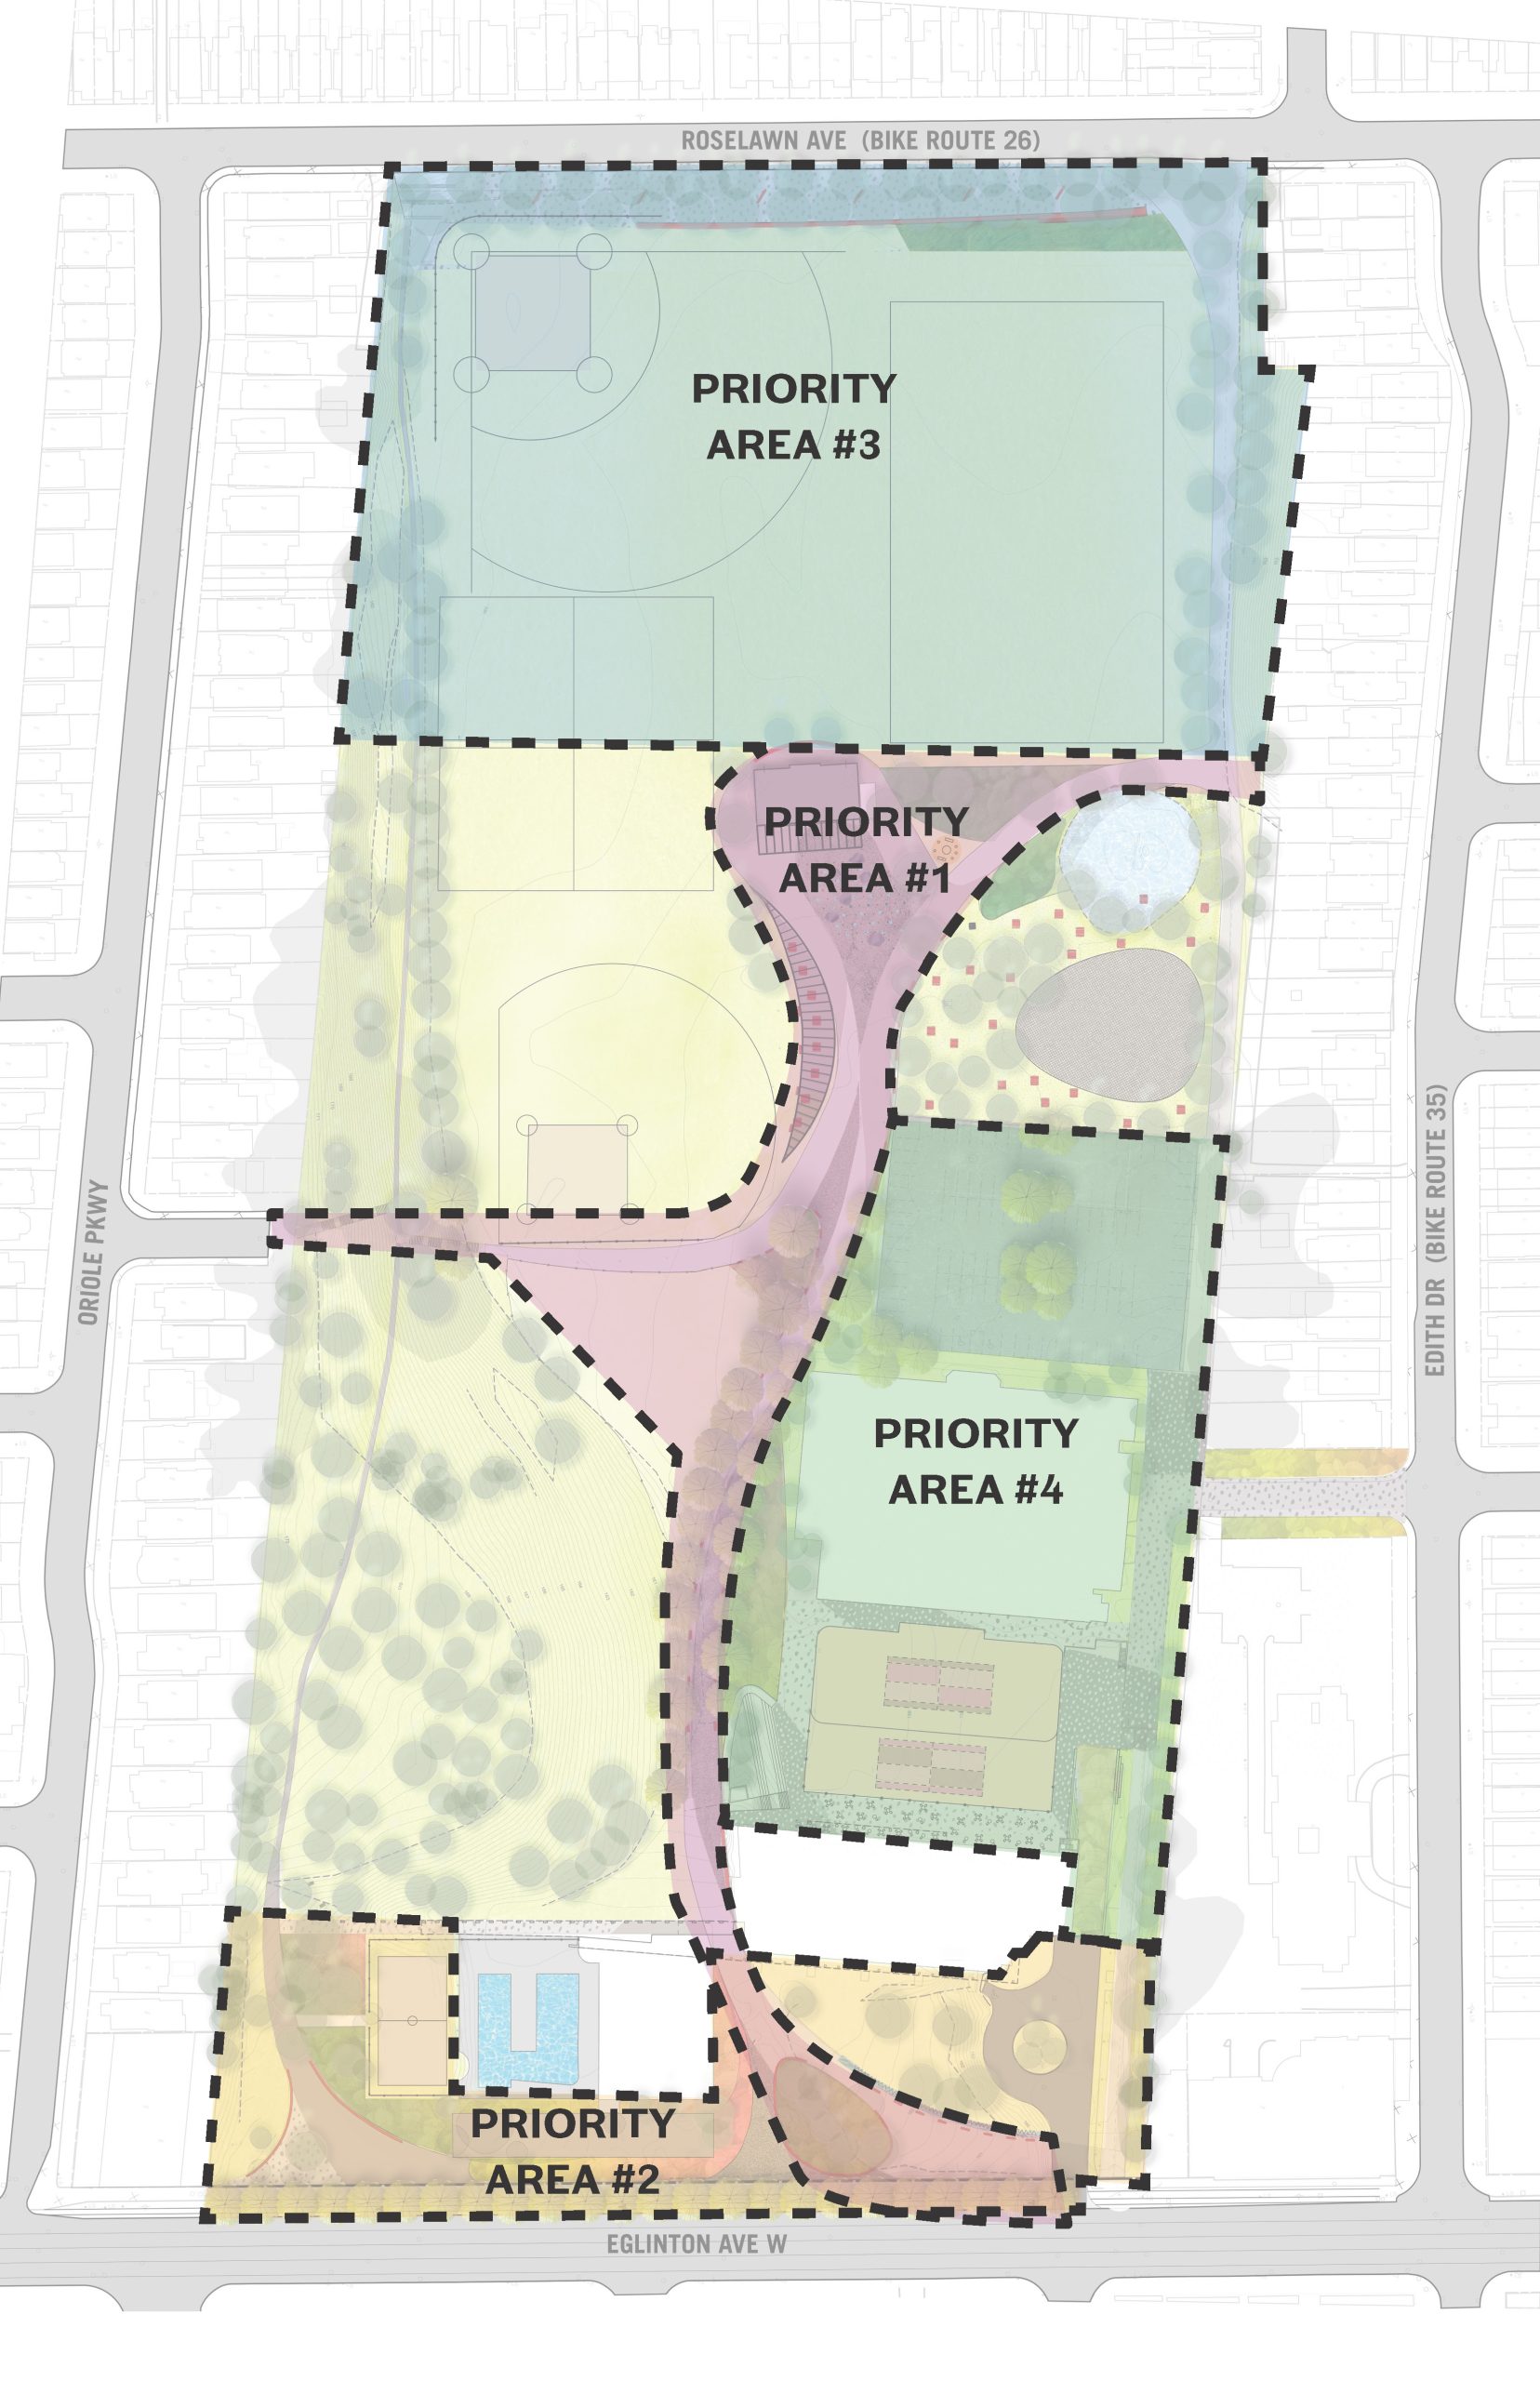 A map showing Eglinton Park, bordered by Eglinton Avenue West to the south, Edith Drive to the east, Roselawn to the north, and Oriole Parkway to the west showing the four priority areas identified in the Master Plan. Priority area 1, show in pink is located in the centre of the park and connects east to west from Edith Drive to Oriole Parkway. Priority area 2, shown in orange is located towards the lower south section of the park, along Eglinton Avenue West. Priority are 3 is located shown in green is a large section at the north area of the park along Roselawn Avenue spanning the width of the entire width of the park. Priority area 4 is located to the east of the park, along Edith Drive and borders priority area 1 at the centre of the park. 